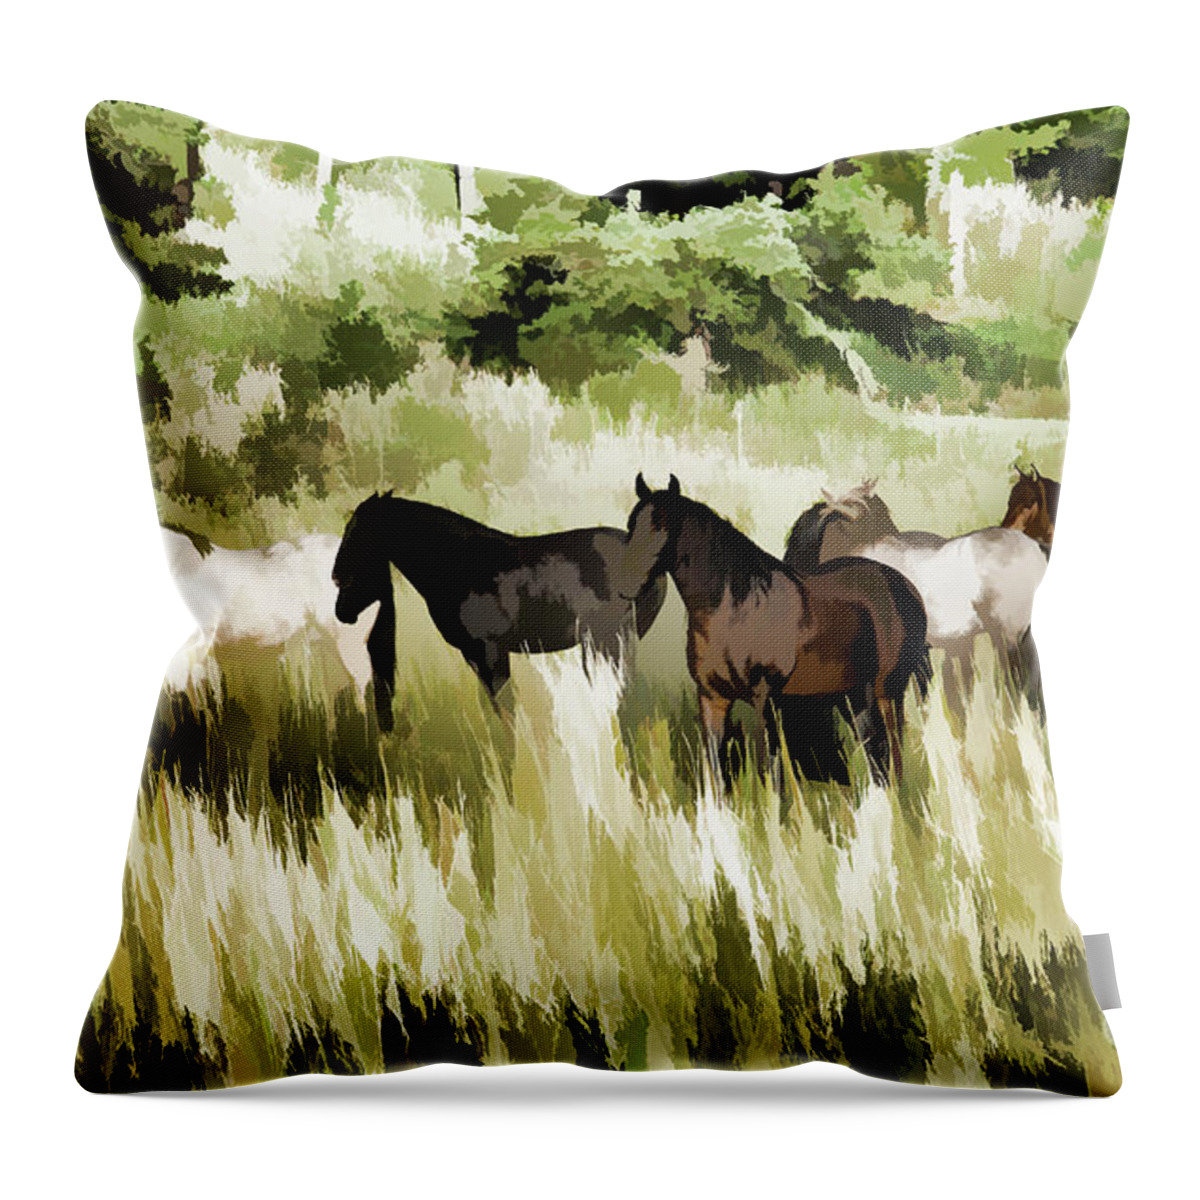 Horse Throw Pillow featuring the mixed media South Dakota Herd of Horses by Wilma Birdwell